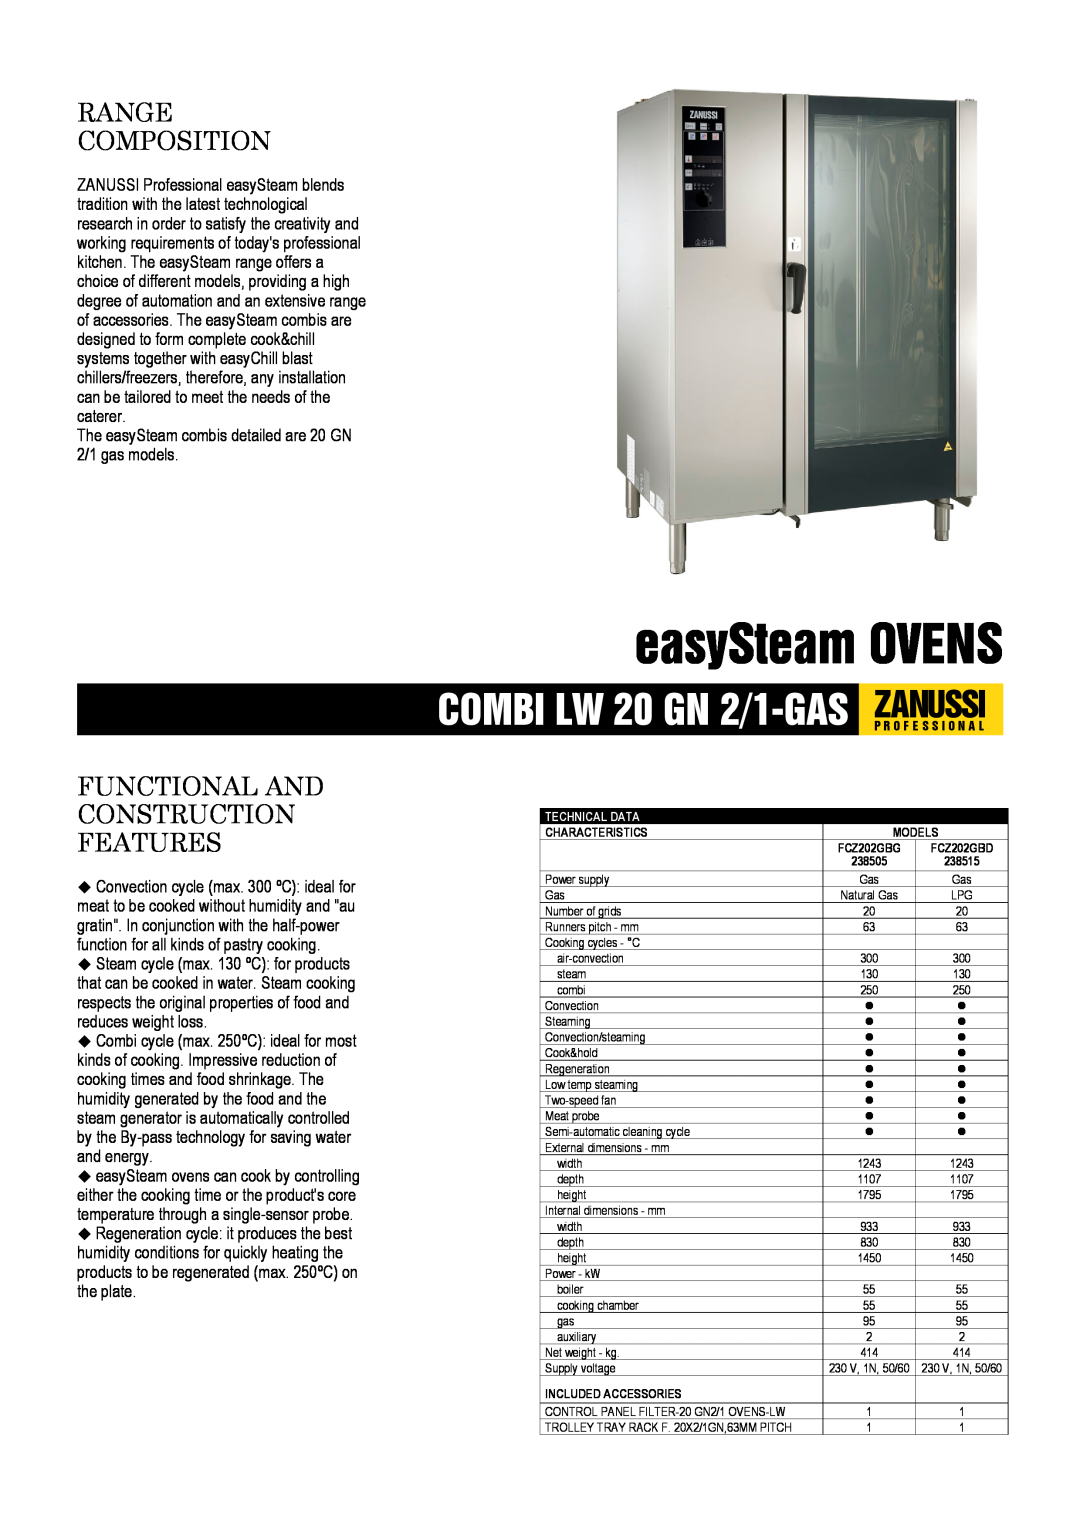 Zanussi 238515, 238505, FCZ202GBG dimensions easySteam OVENS, Range Composition, Functional And Construction Features 